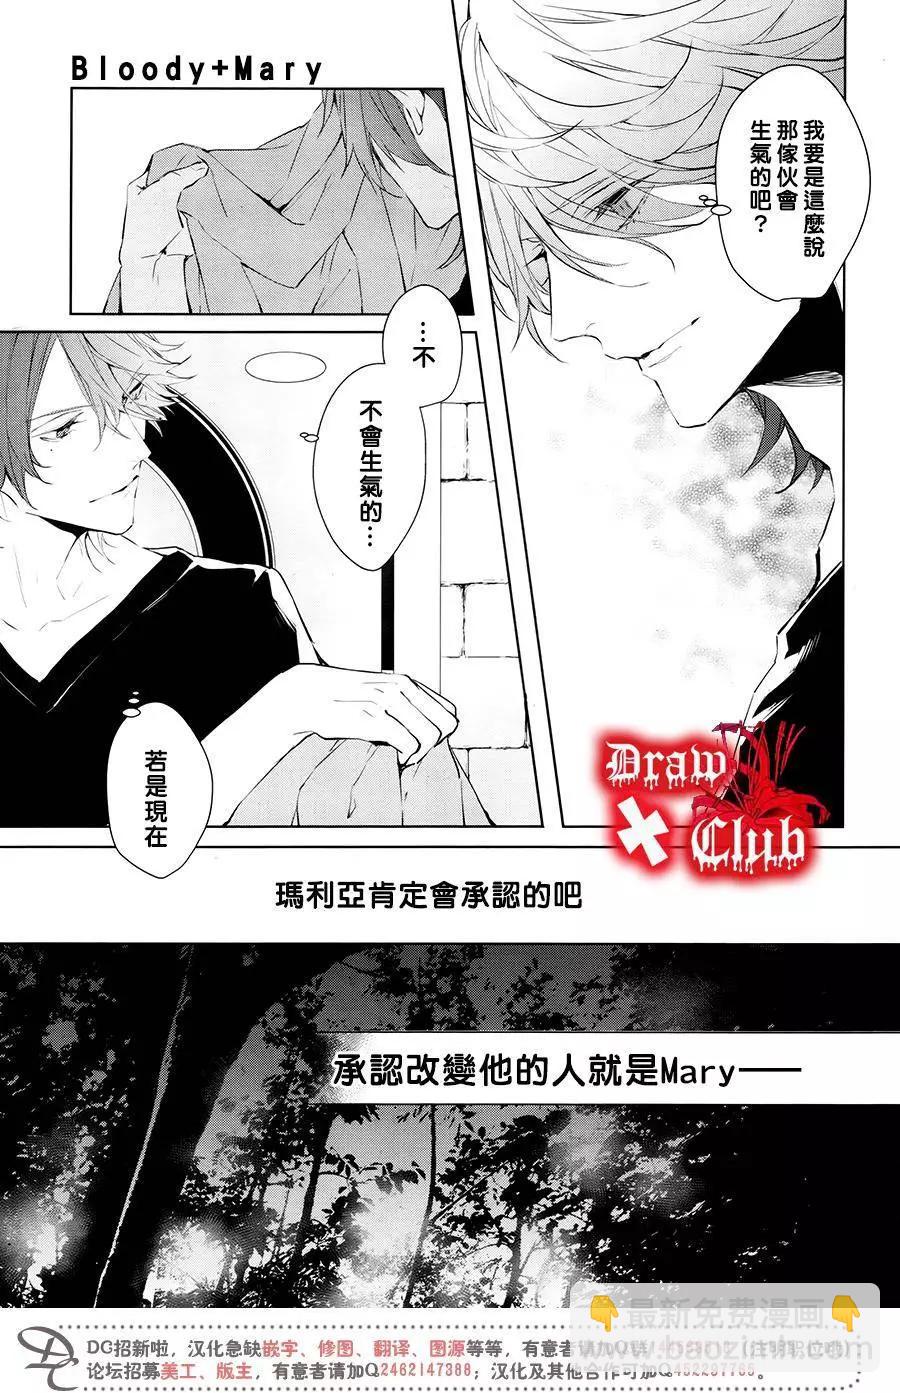 Bloody Mary - 第32回 - 4